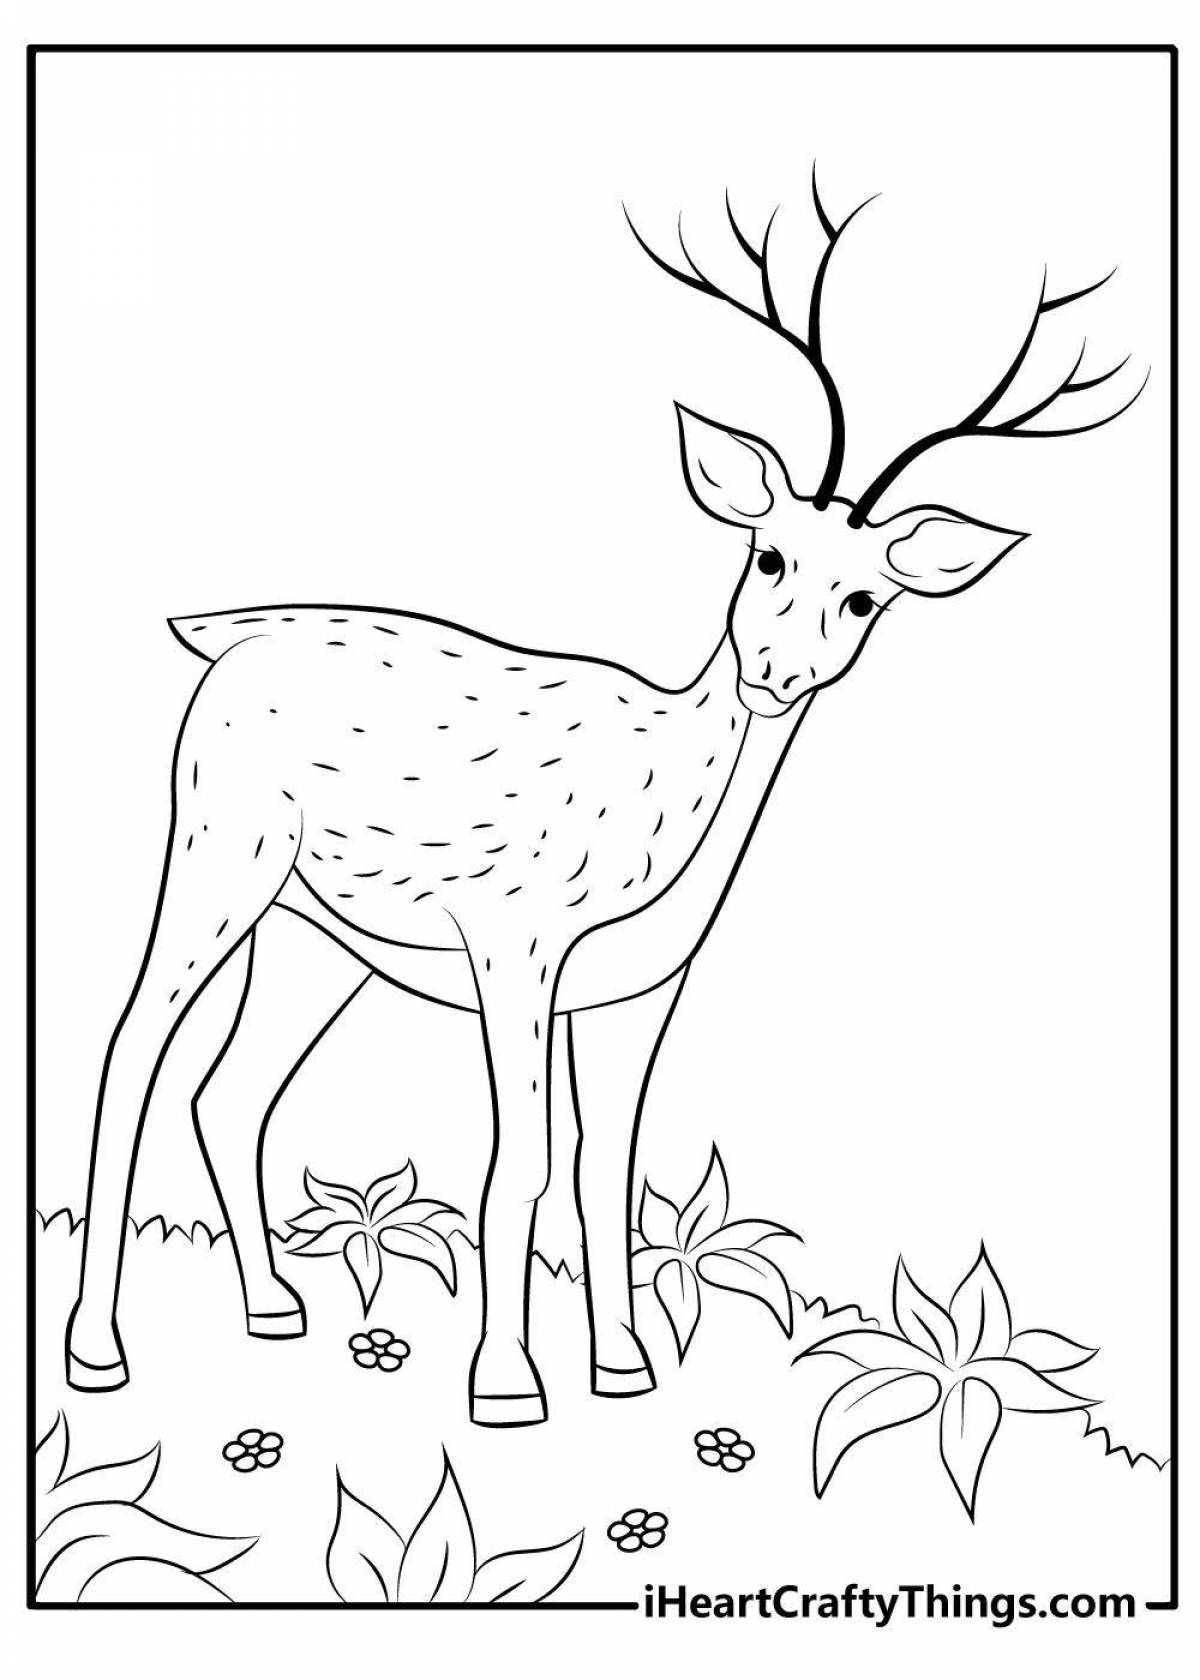 Deer live coloring for children 3-4 years old